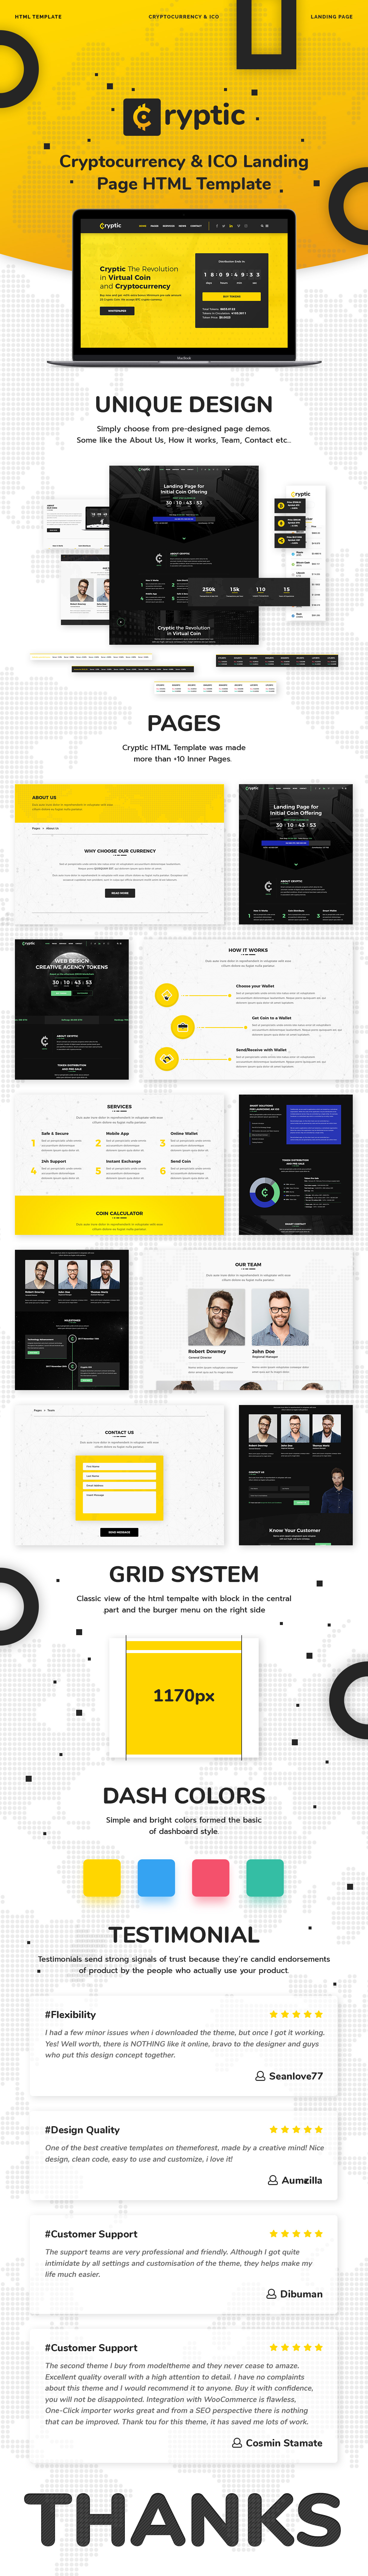 Cryptic - Cryptocurrency & ICO Landing Page HTML Template - 6